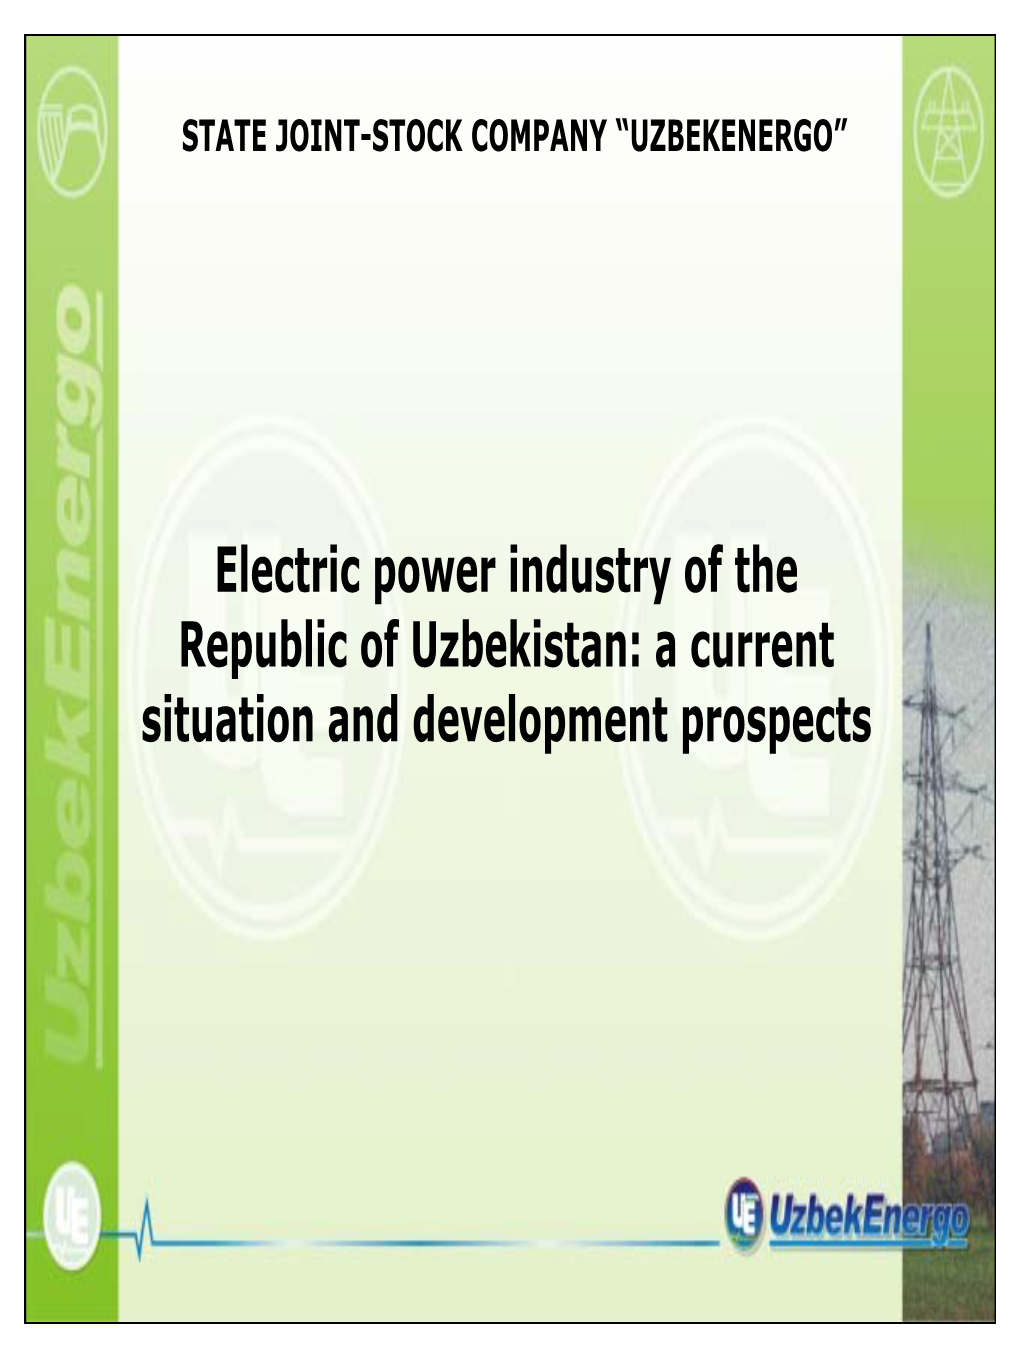 Electric Power Industry of the Republic of Uzbekistan: a Current Situation and Development Prospects About the Company